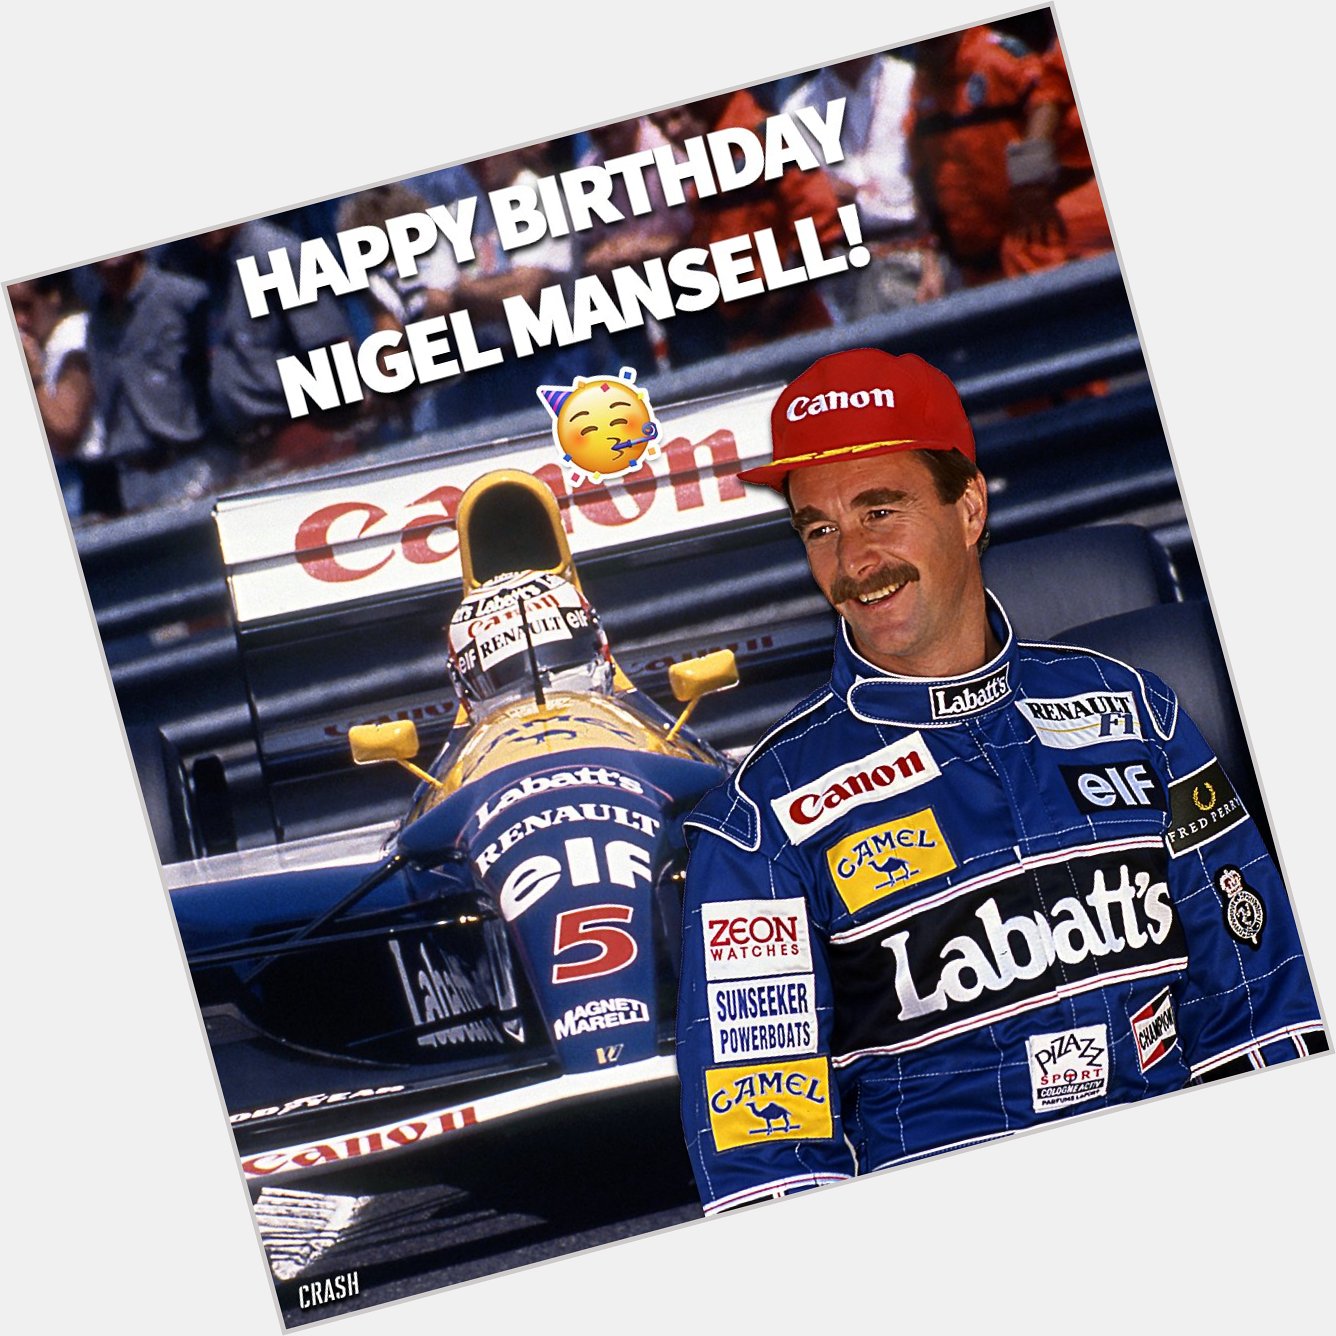 A big Happy Birthday to \Red 5\ 5 The 1992 World Champion, Nigel Mansell    